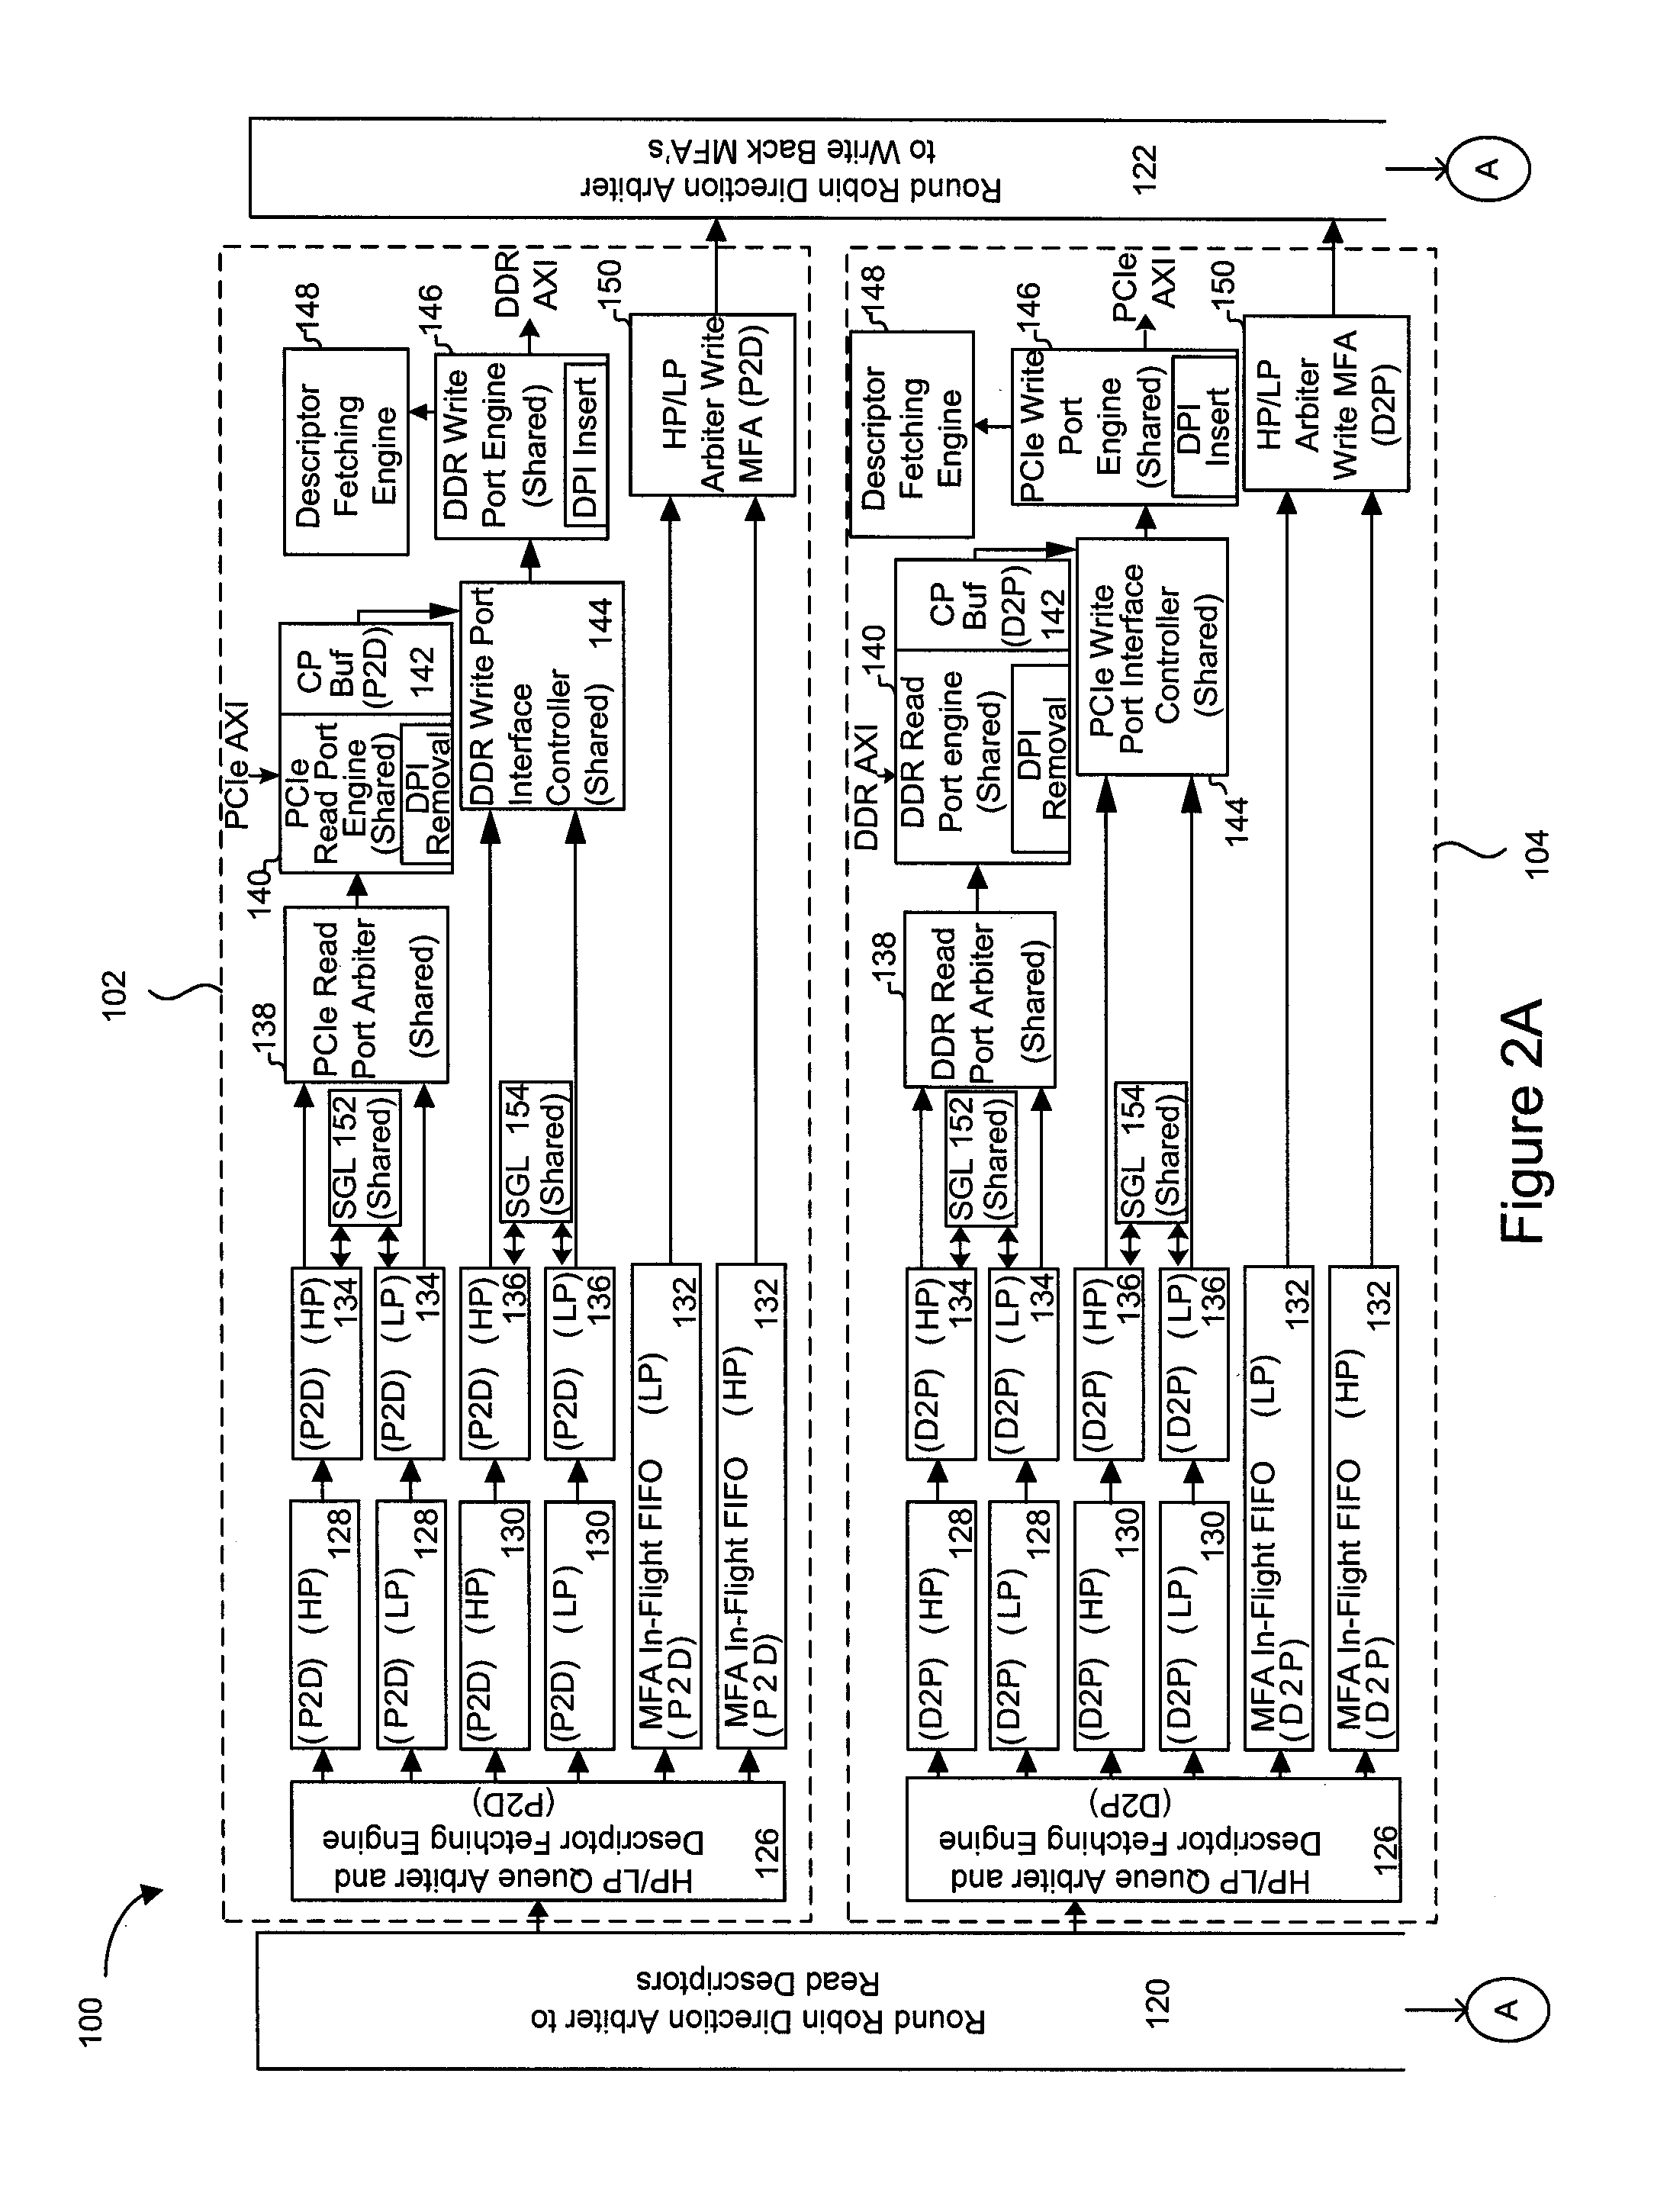 Logical address direct memory access with multiple concurrent physical ports and internal switching